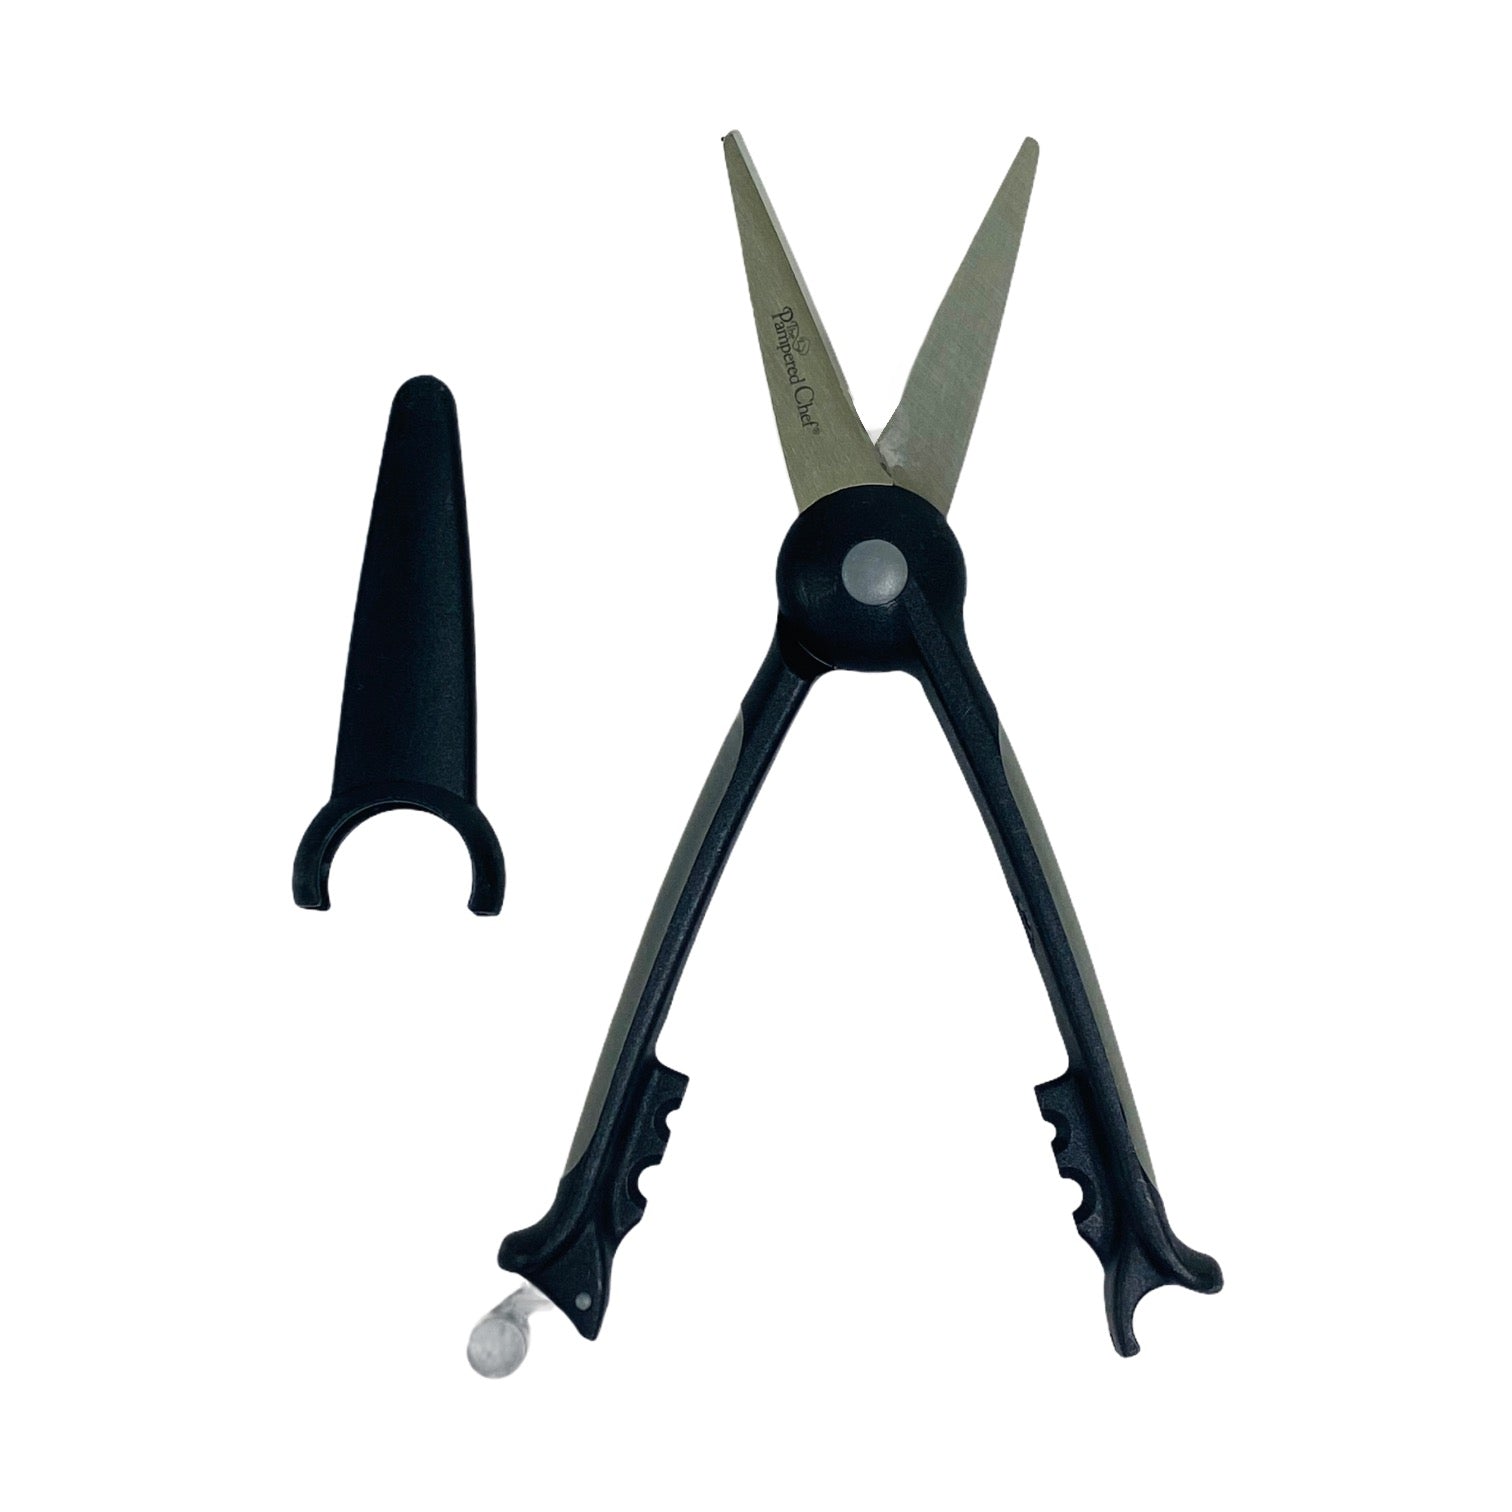 The Pampered Chef Kitchen Scissors & Shears